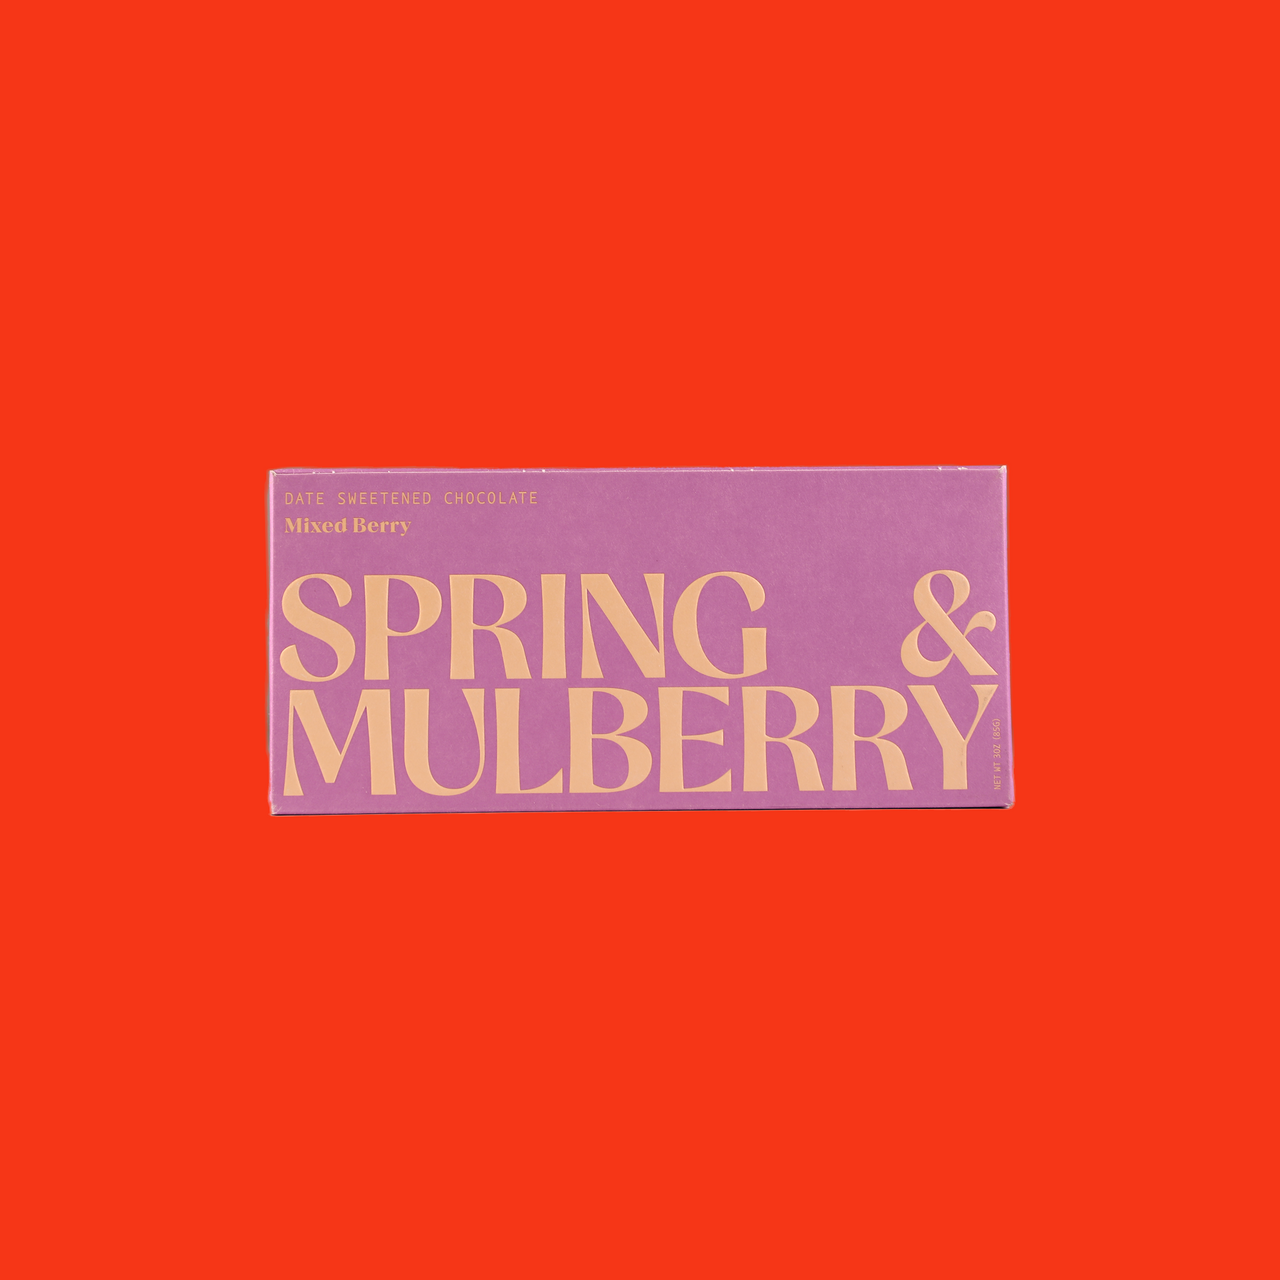 Spring & Mulberry Chocolate - Mixed Berry